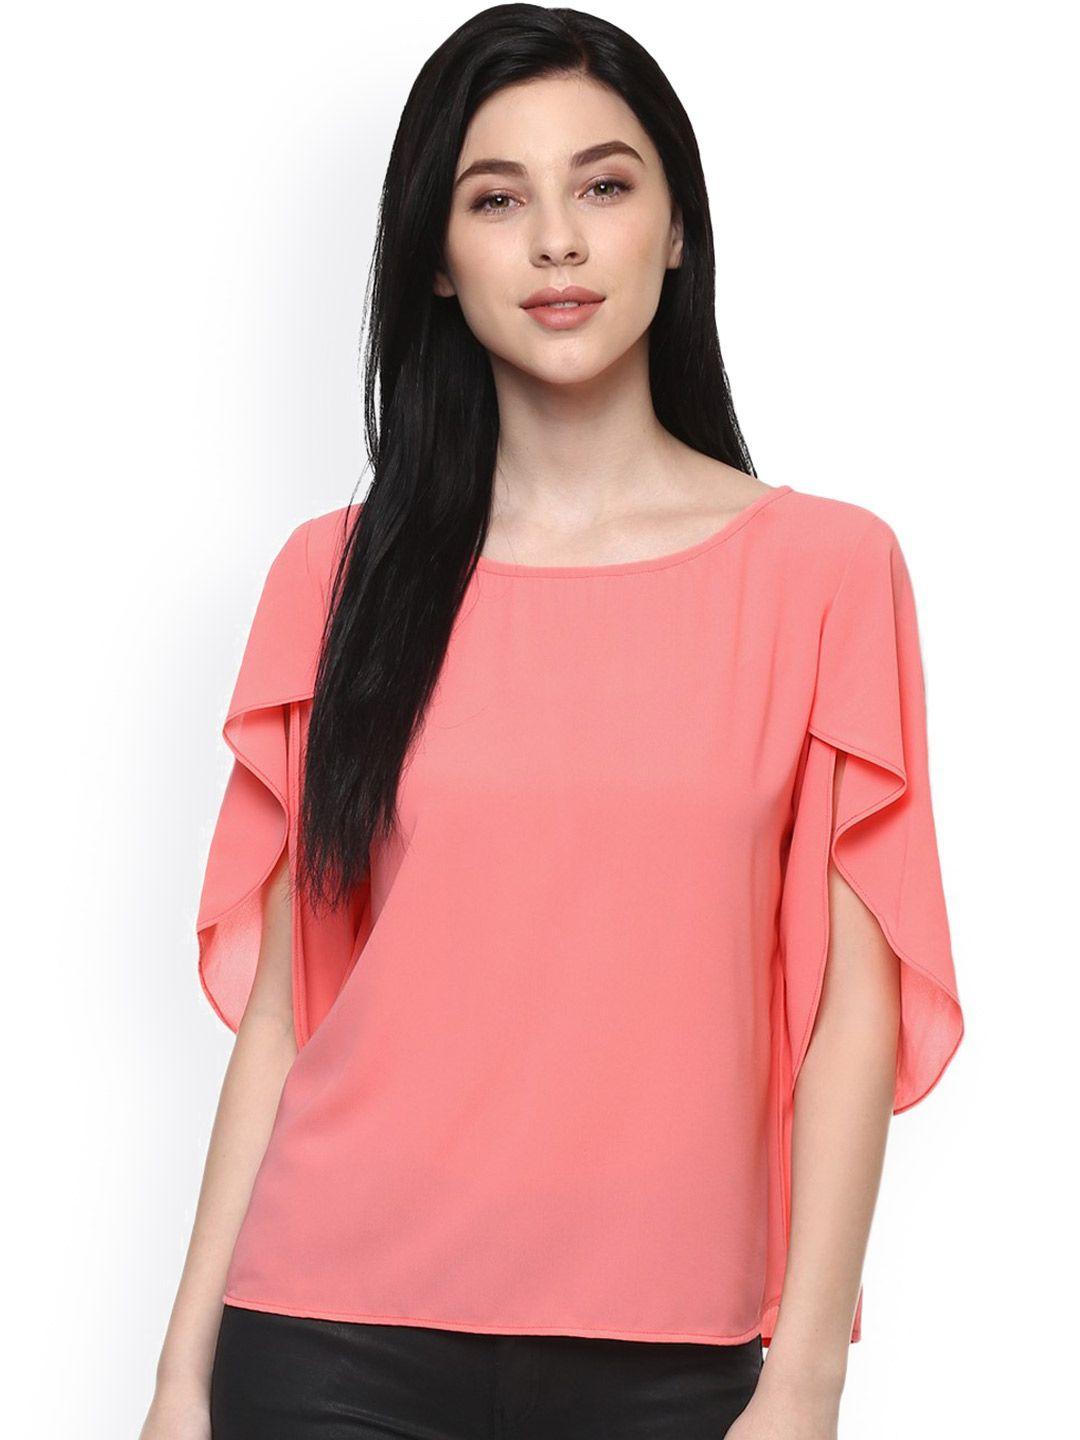 pannkh women coral pink solid top